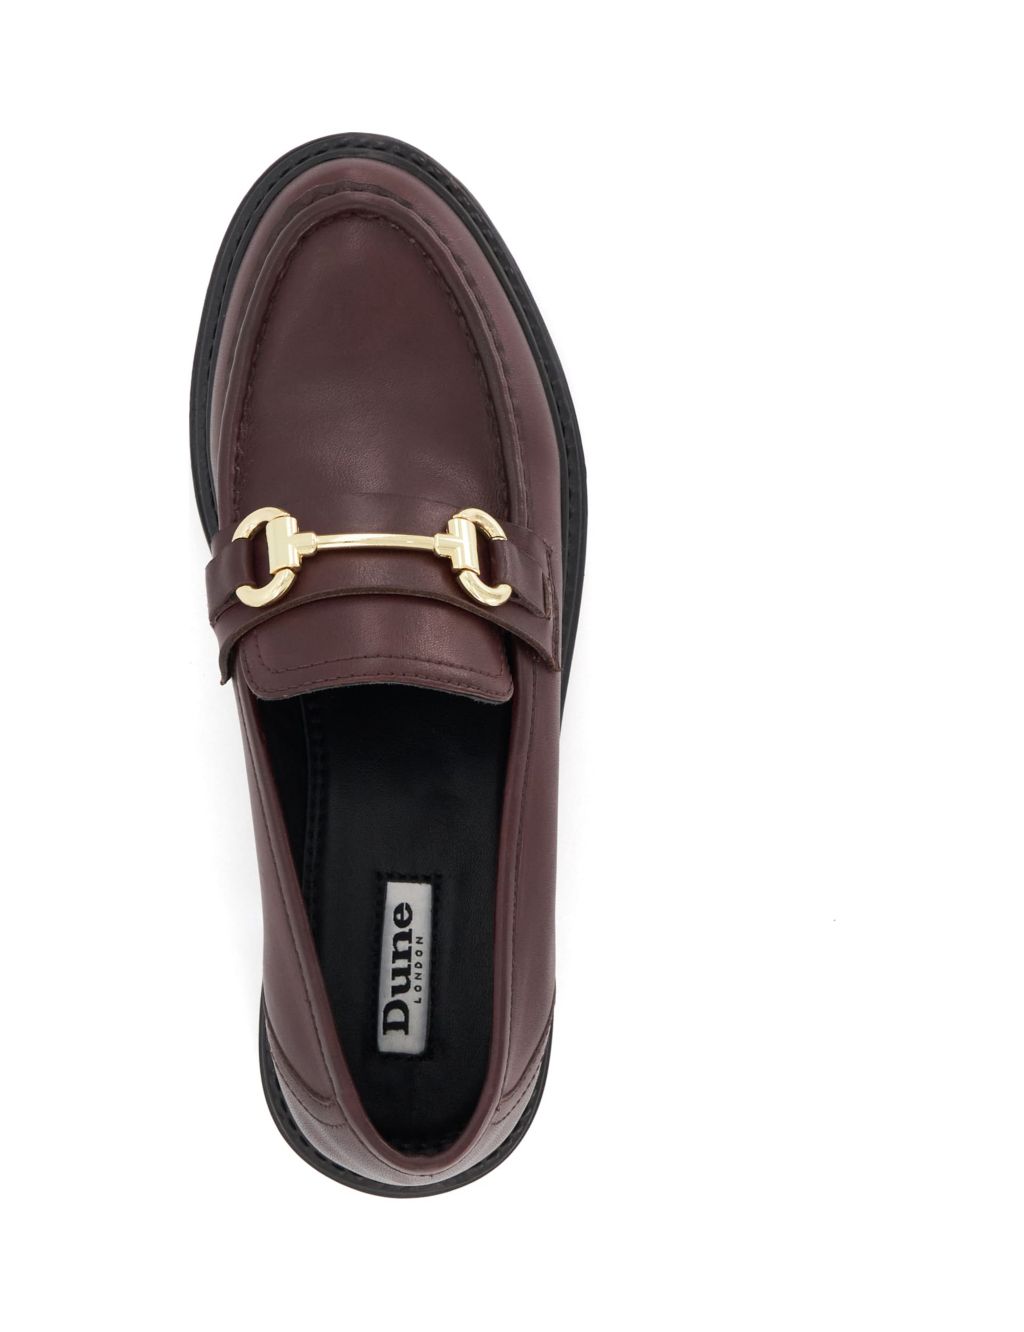 Leather Chunky Bar Flat Loafers image 4